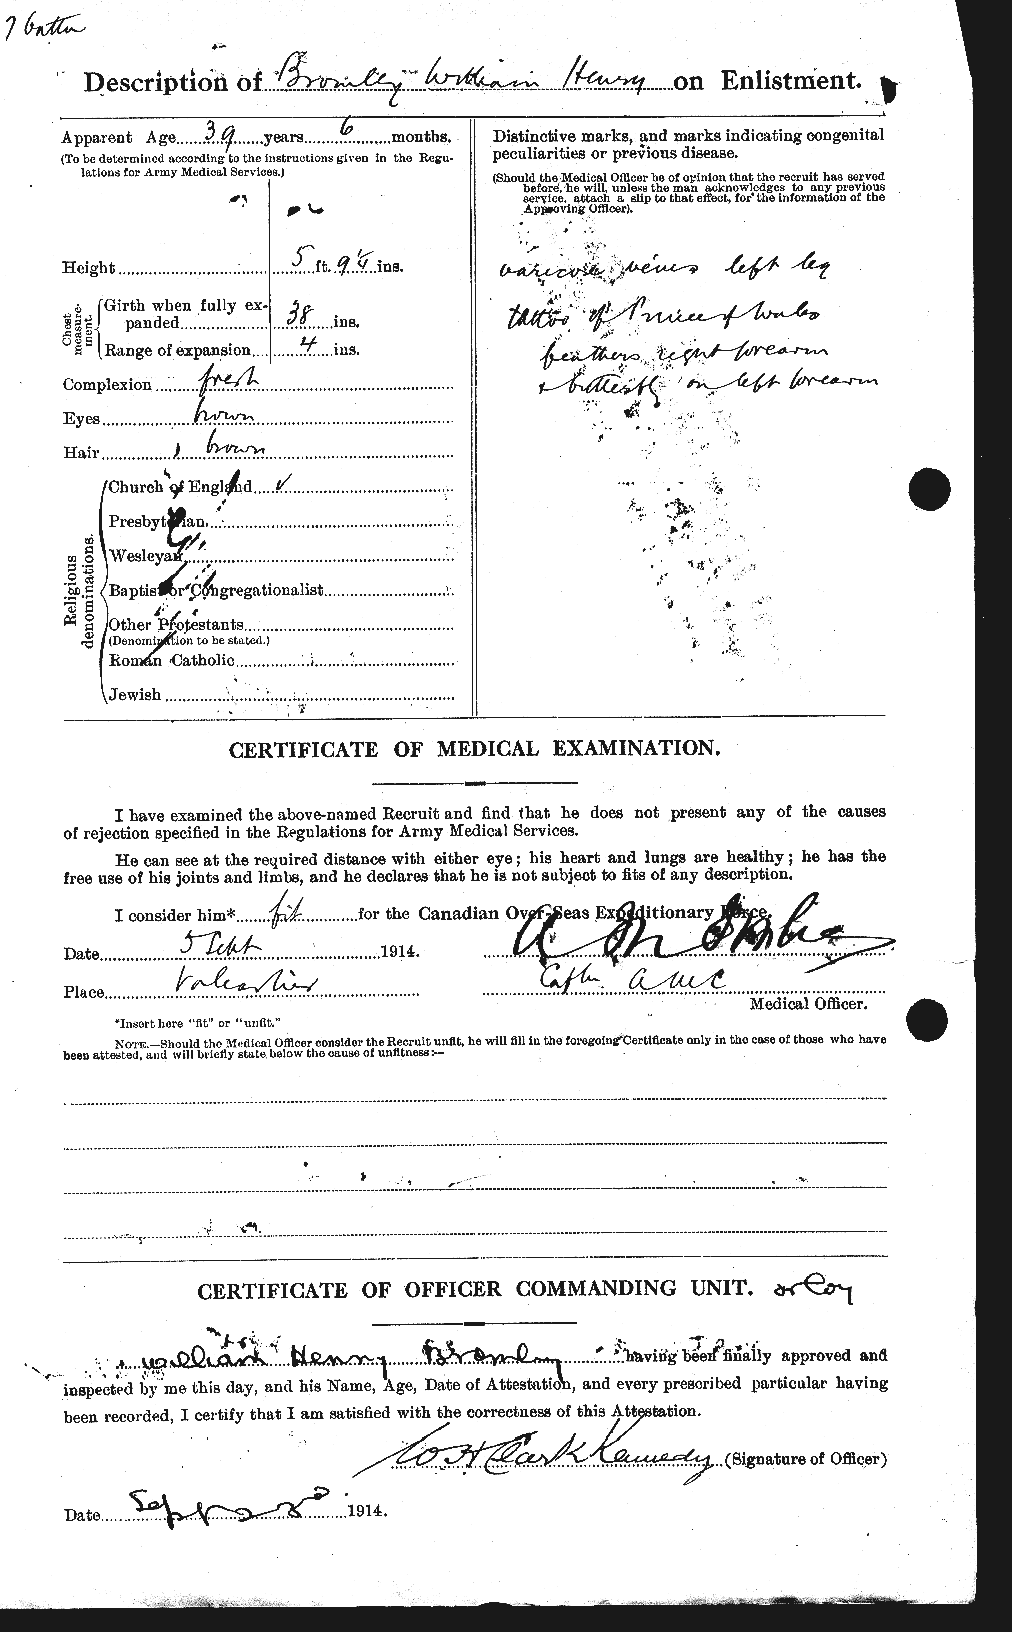 Personnel Records of the First World War - CEF 262191b